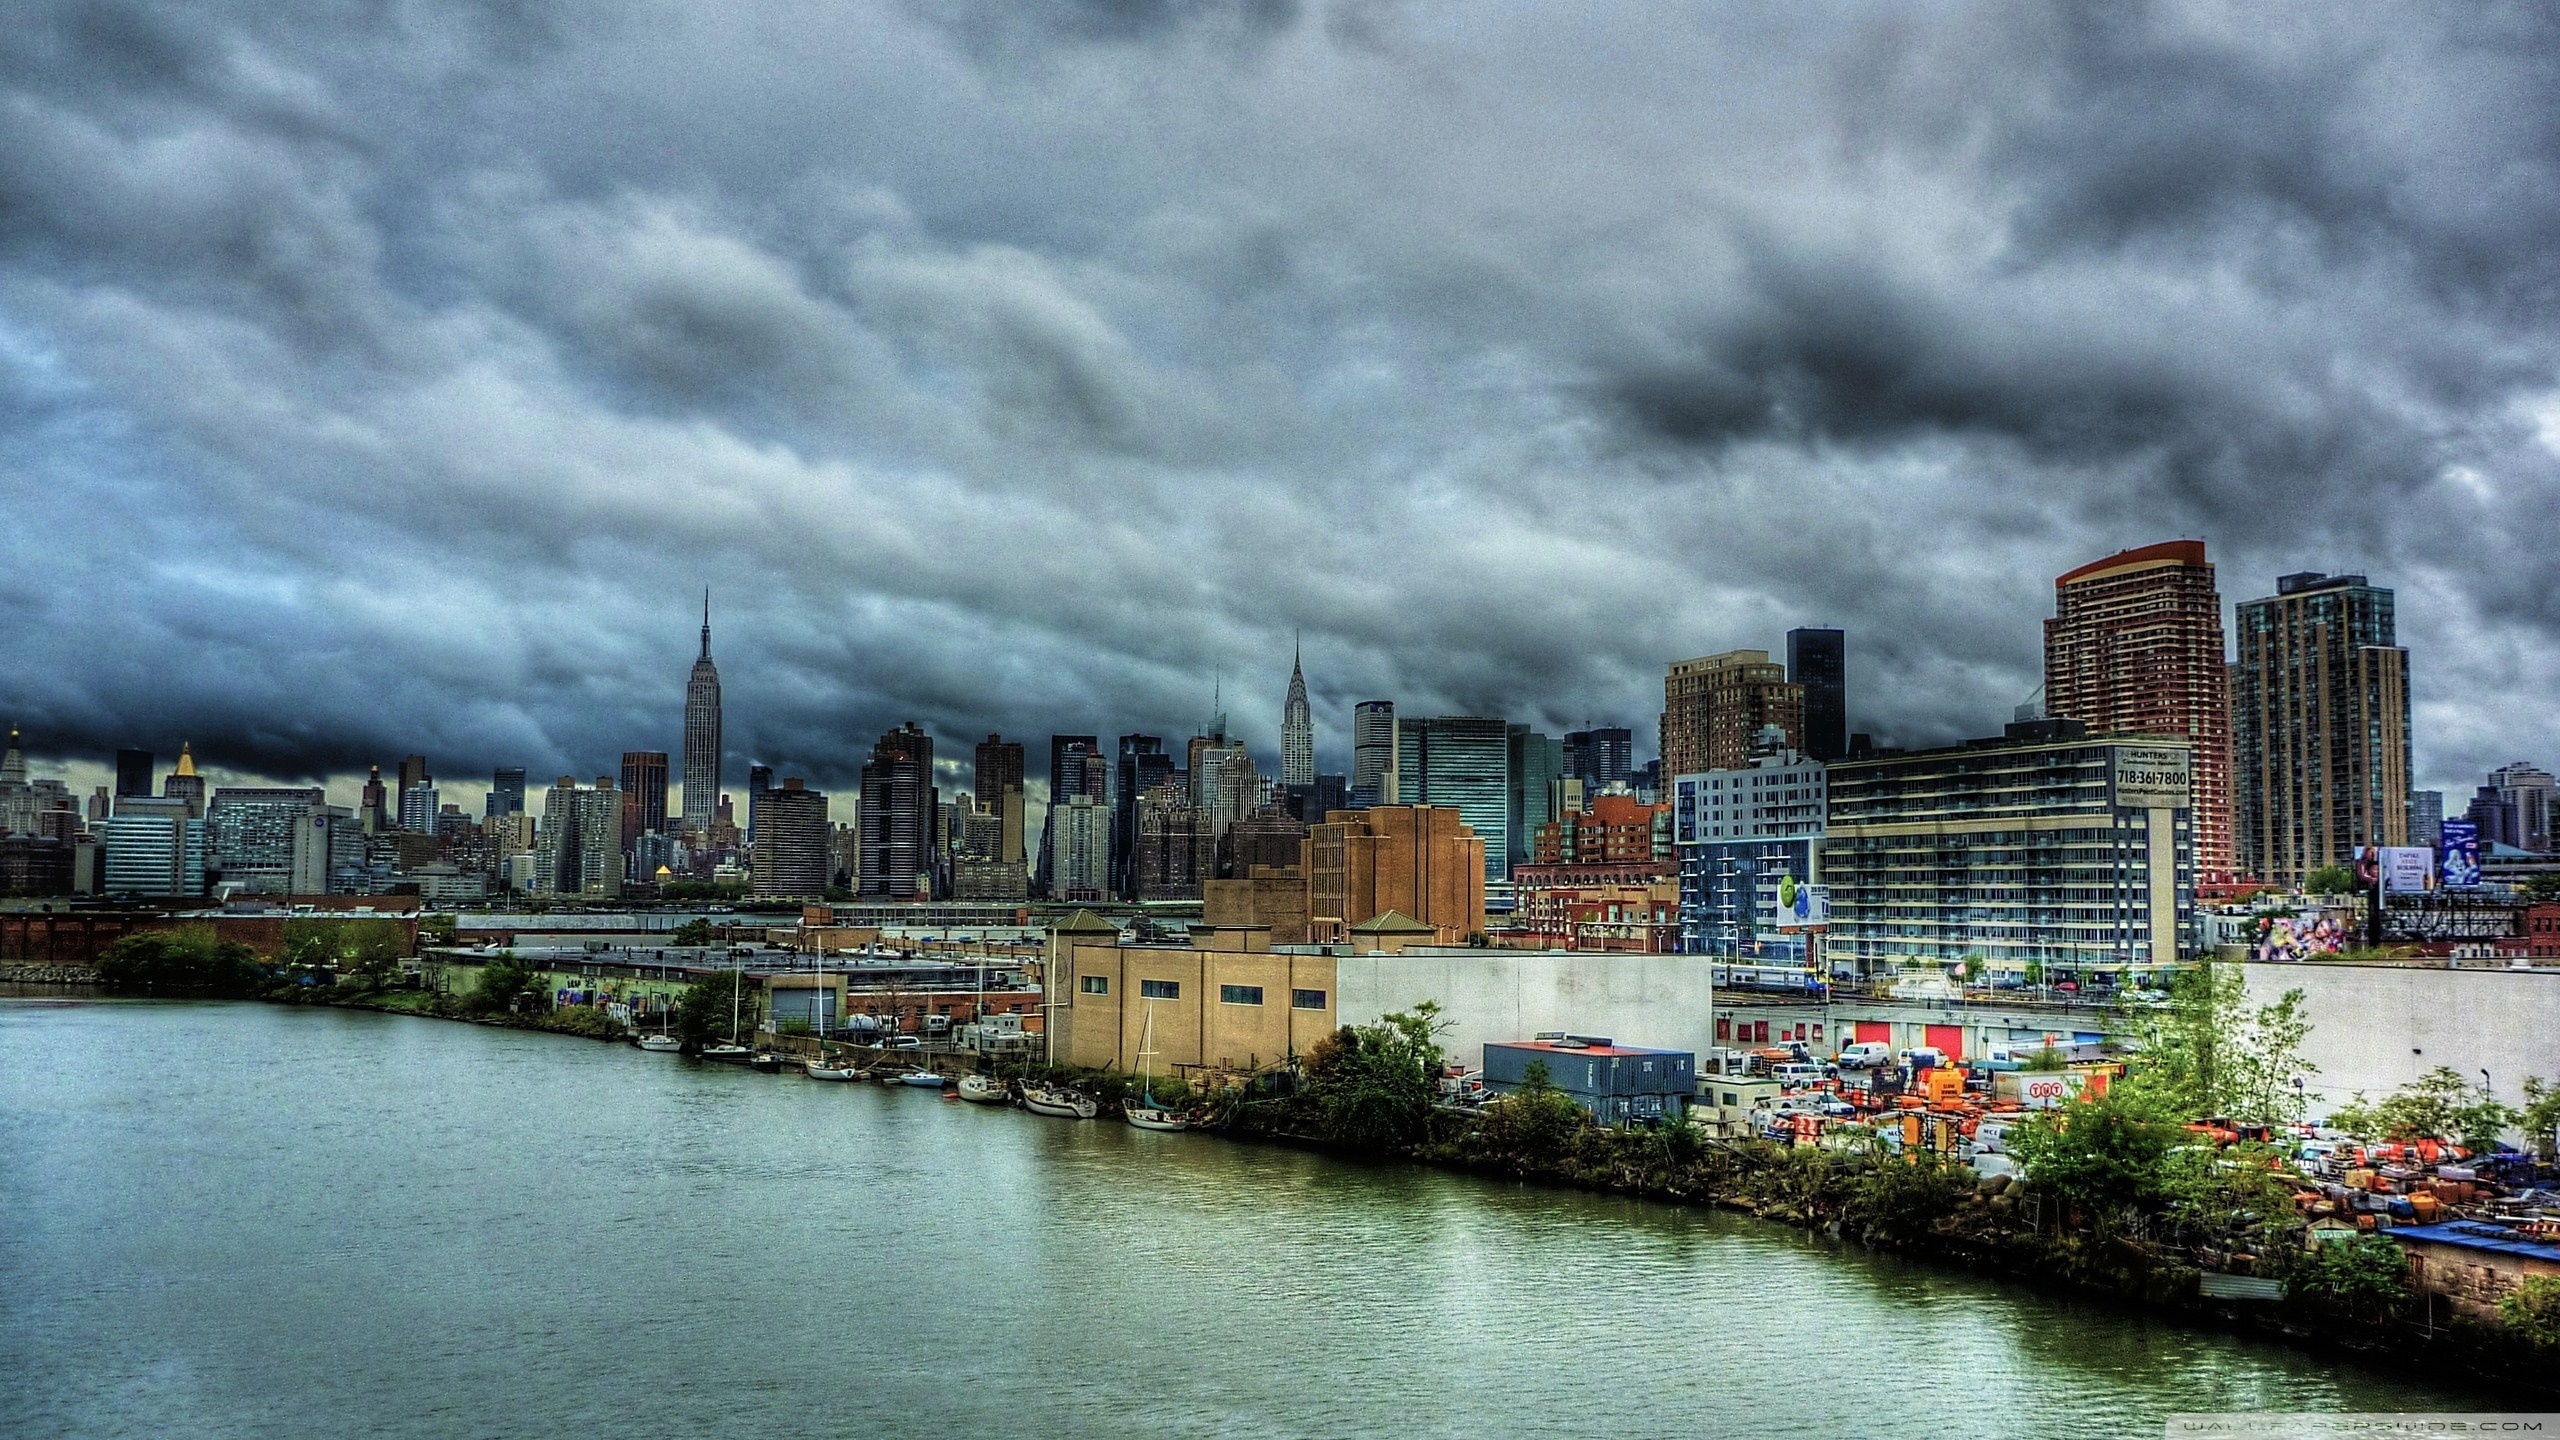 Cloudy Day In New York Ultra HD Desktop Background Wallpaper for 4K UHD TV, Multi Display, Dual Monitor, Tablet